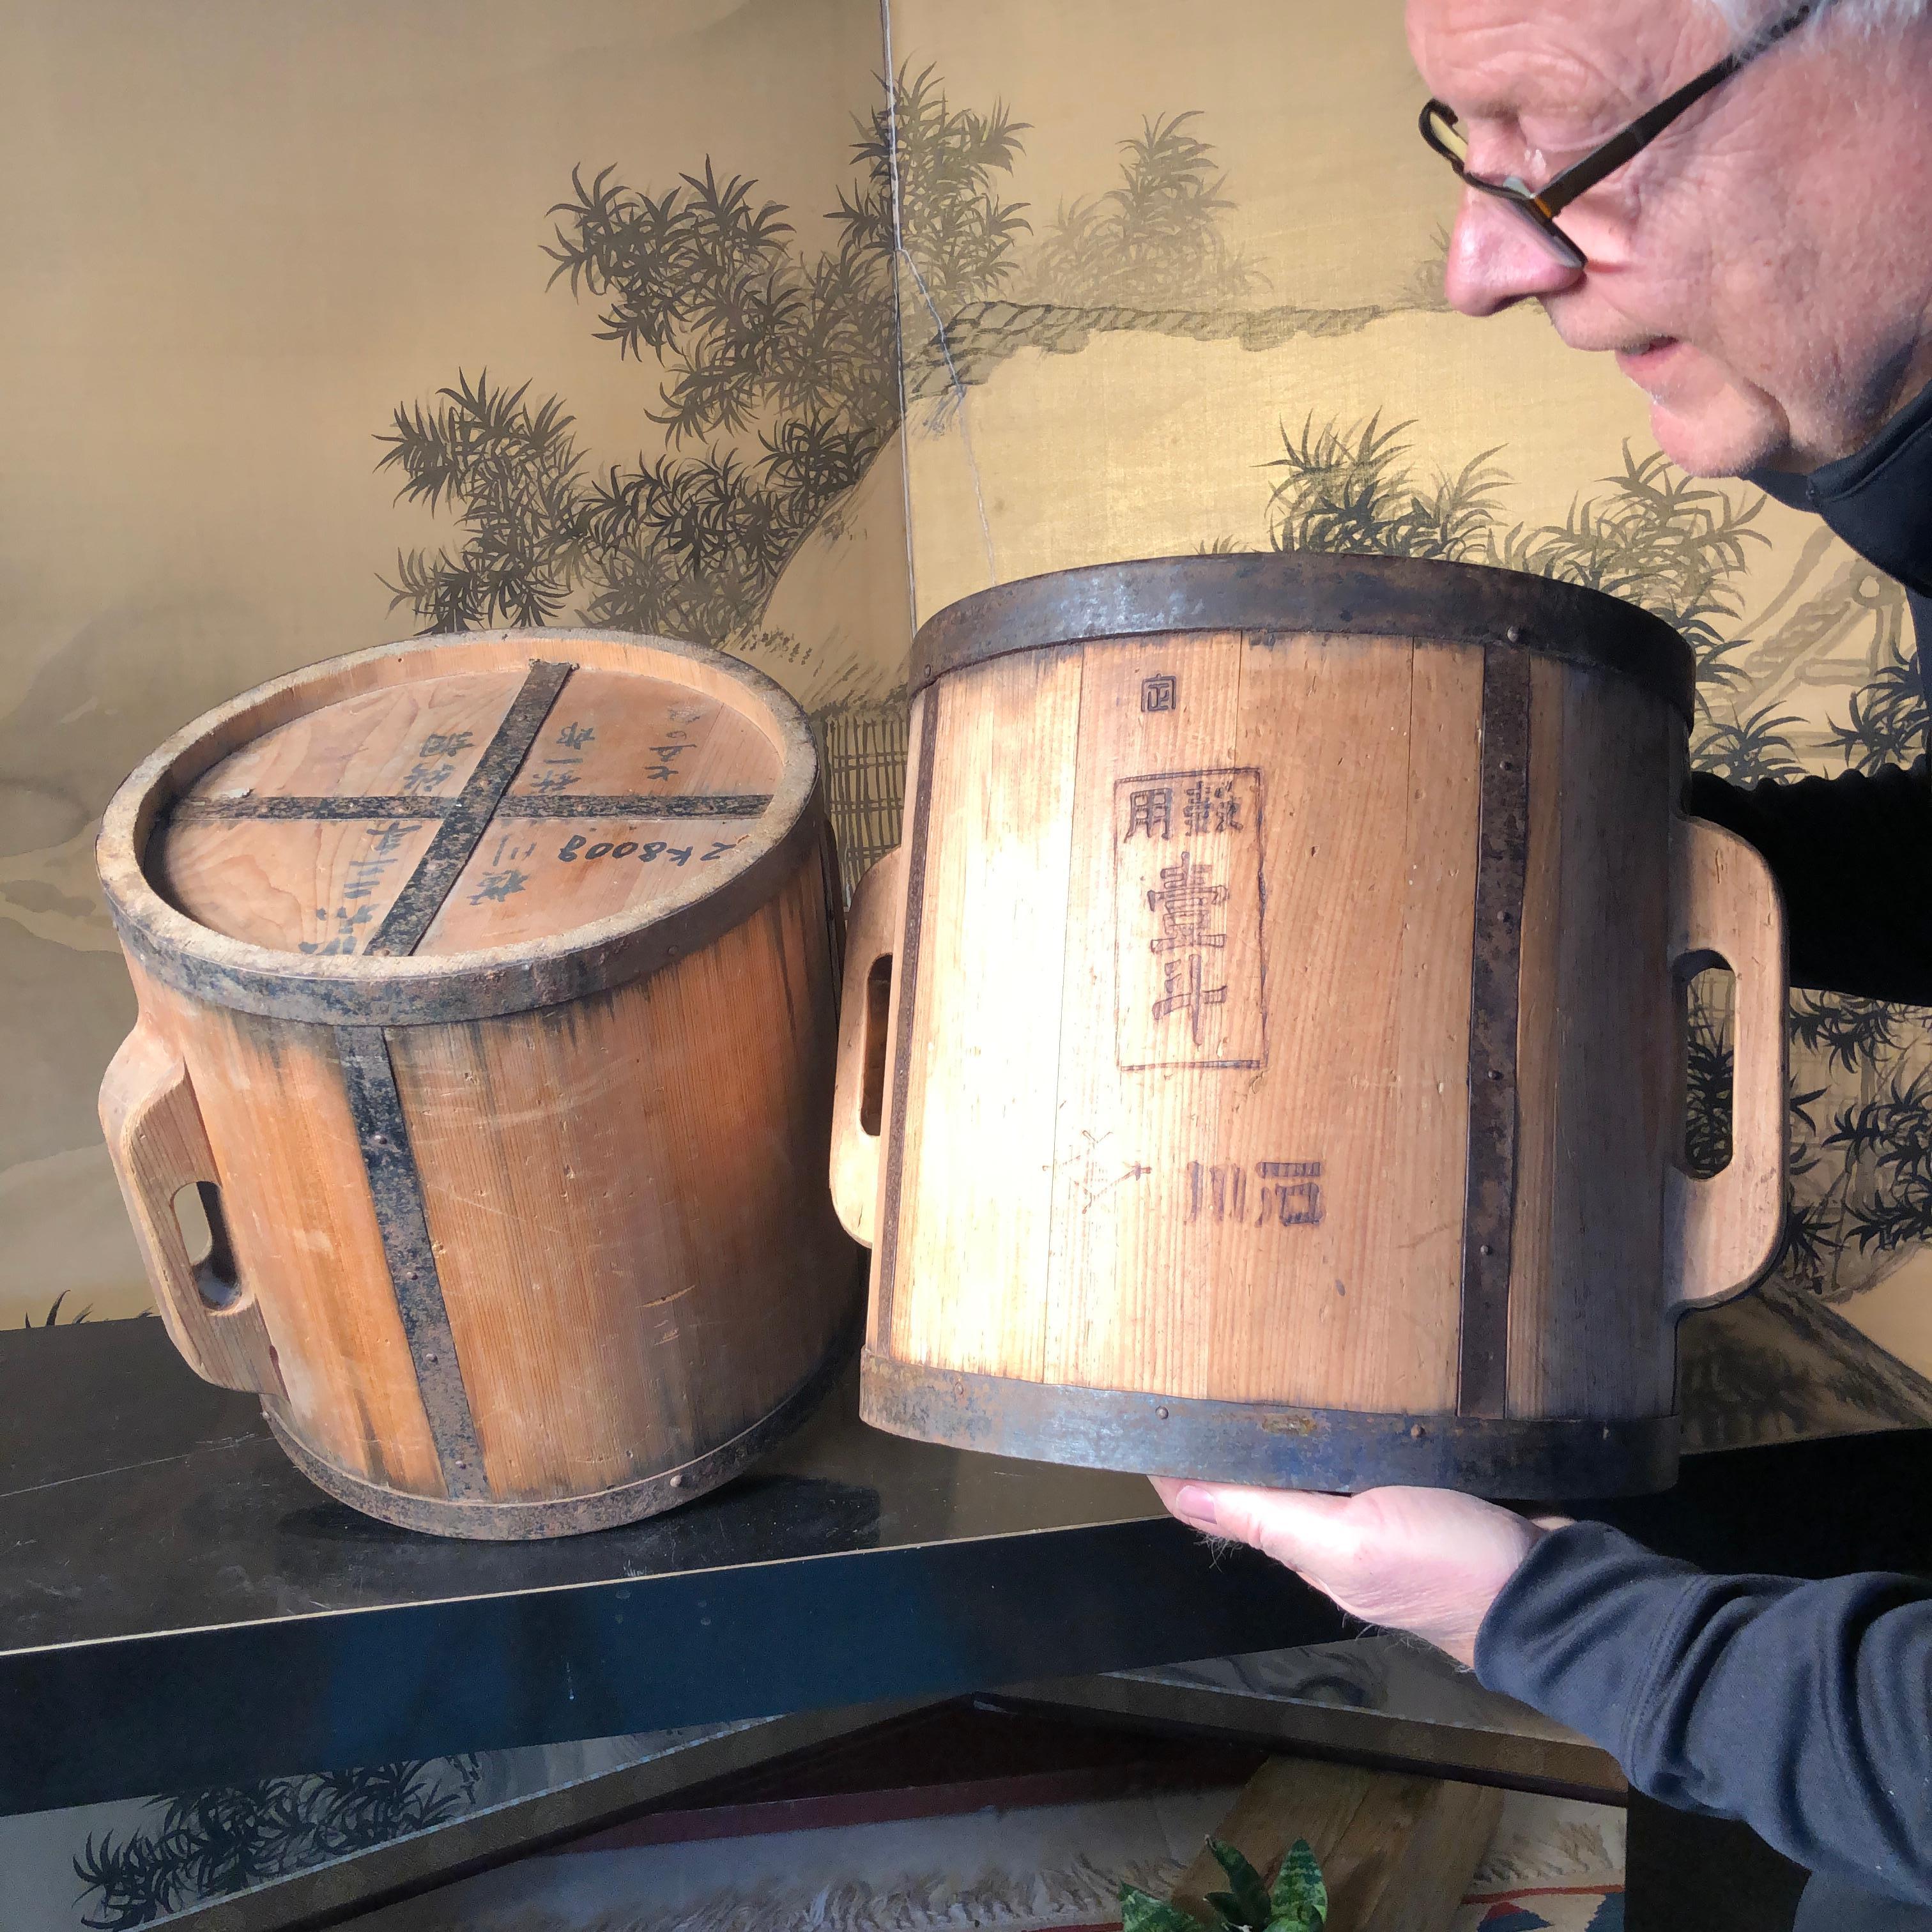 Special find from our latest Japanese Acquisition 

Here's a beautiful and unique way to accent your indoor or outdoor garden space with these treasures from Japan! 

This special pair (2) of handmade antique wooden rice measures -Itomasu- are